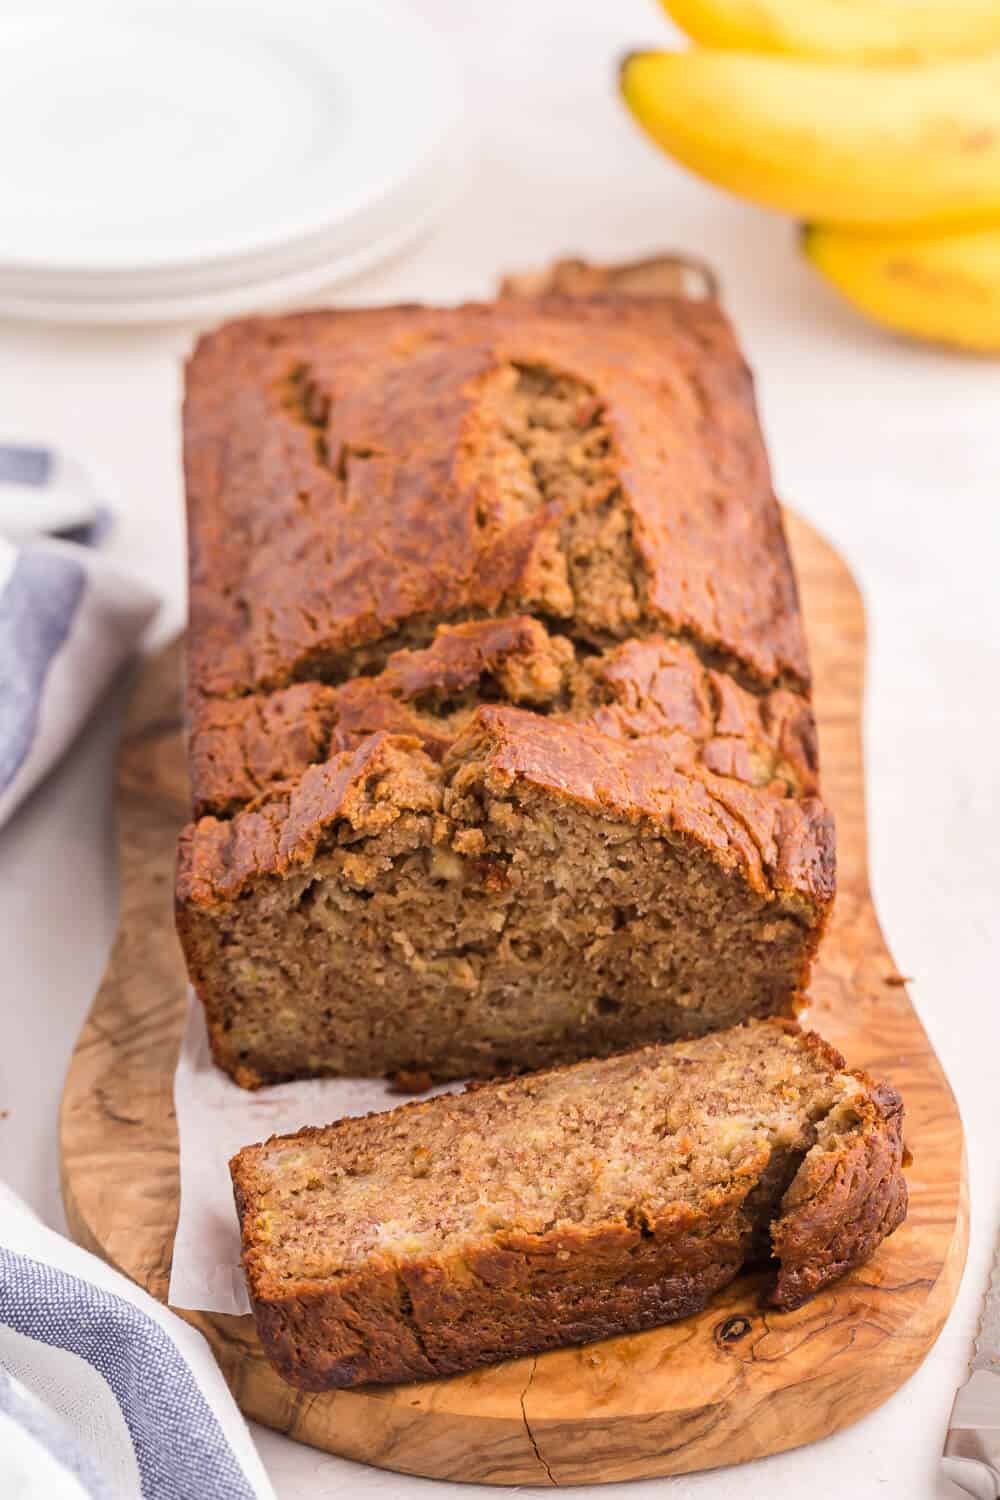 Banana bread with slices cut at the end.